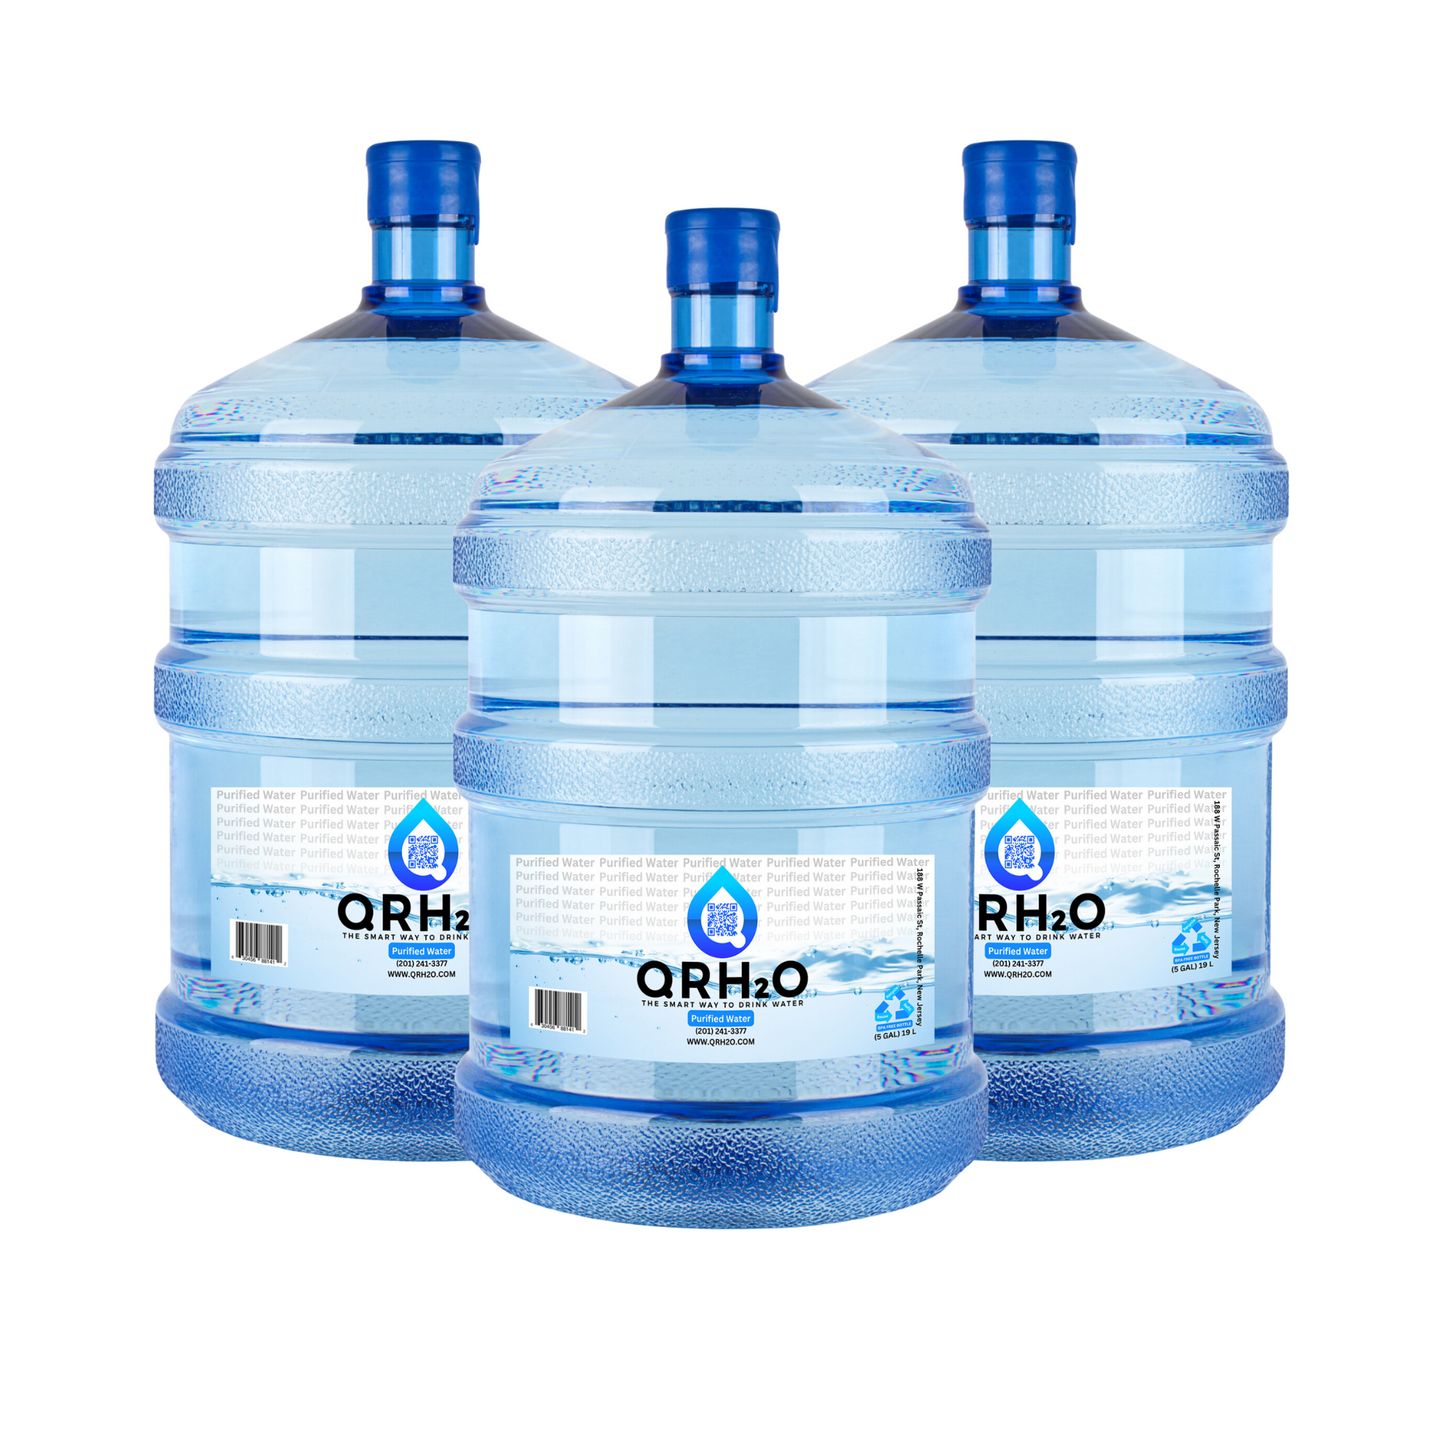 Get clean, purified water at your fingertips with our 3-pack of 5-gallon 100% purified water bottles. Perfect for home, office, or events, our bottles are made with premium quality materials and are rigorously purified to ensure the highest level of cleanliness and taste. Stay hydrated and healthy with our convenient water delivery service.